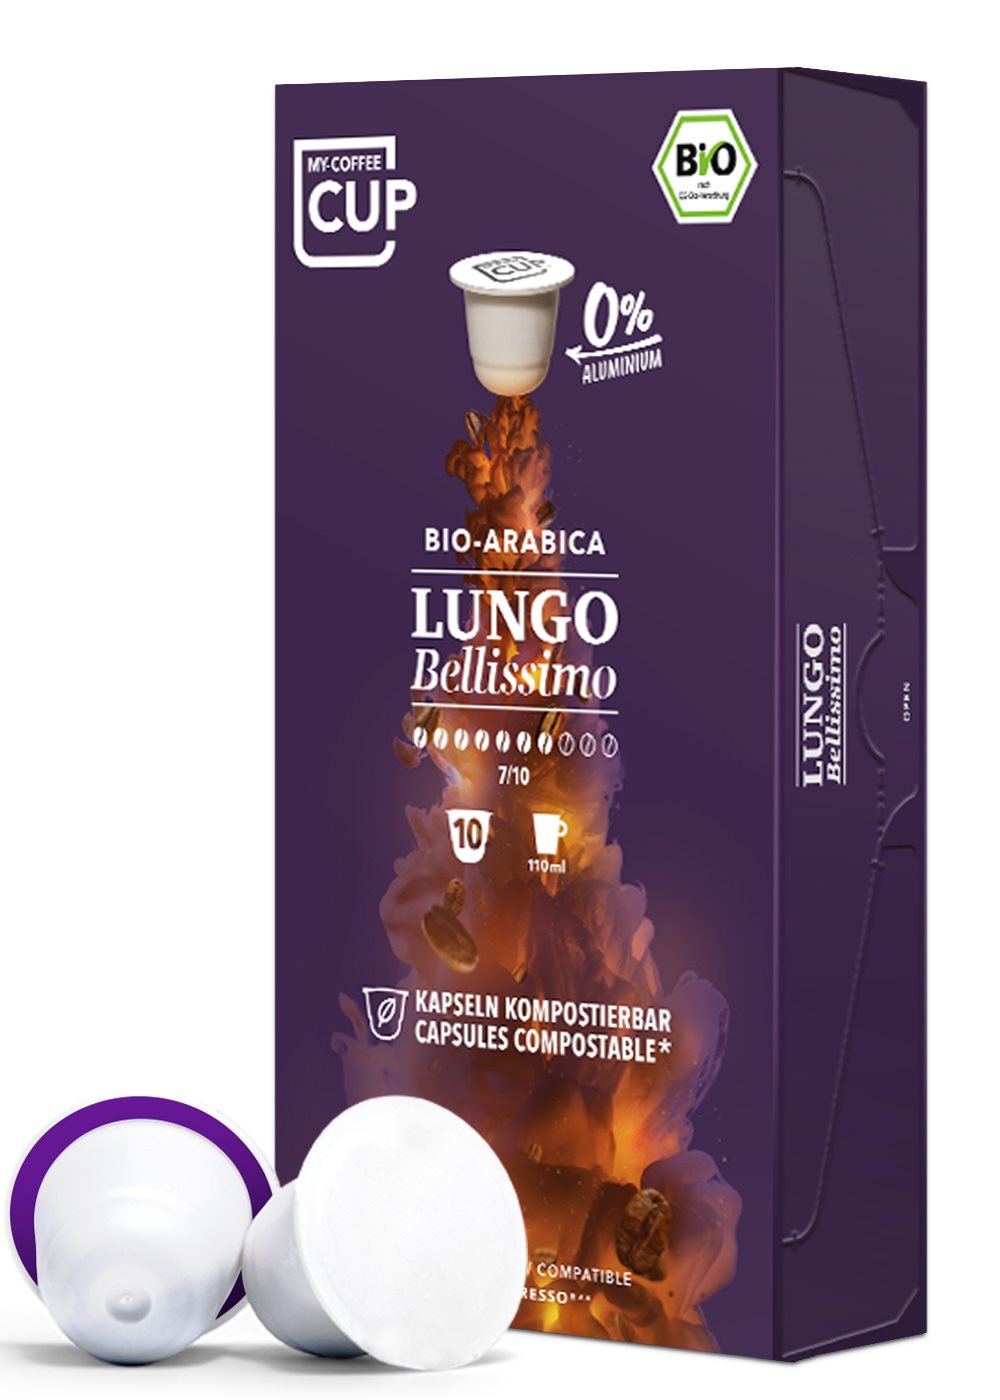 My-CoffeeCup Lungo No. 2 Bellissimo